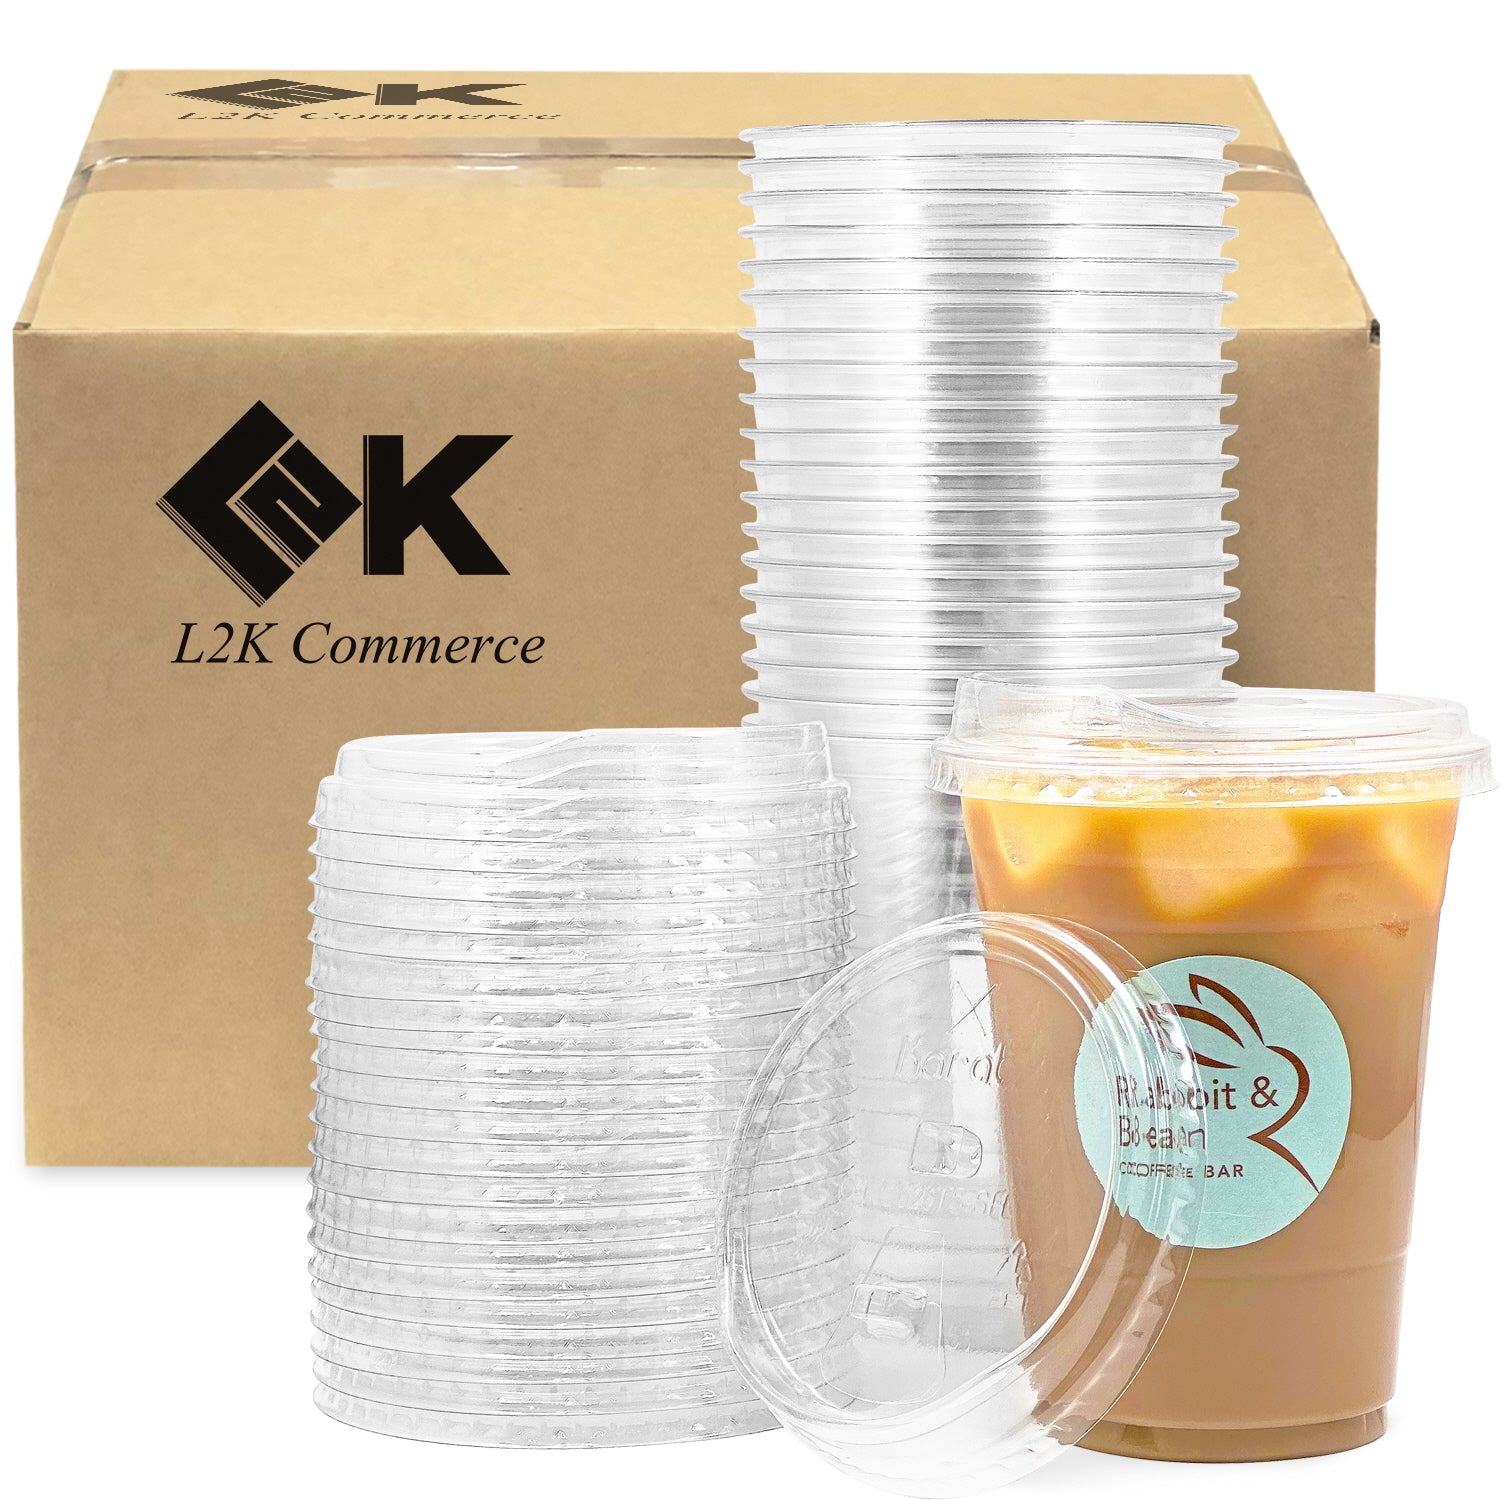 16 oz plastic cup lids, Plastic replacement lid for glass beer can cups